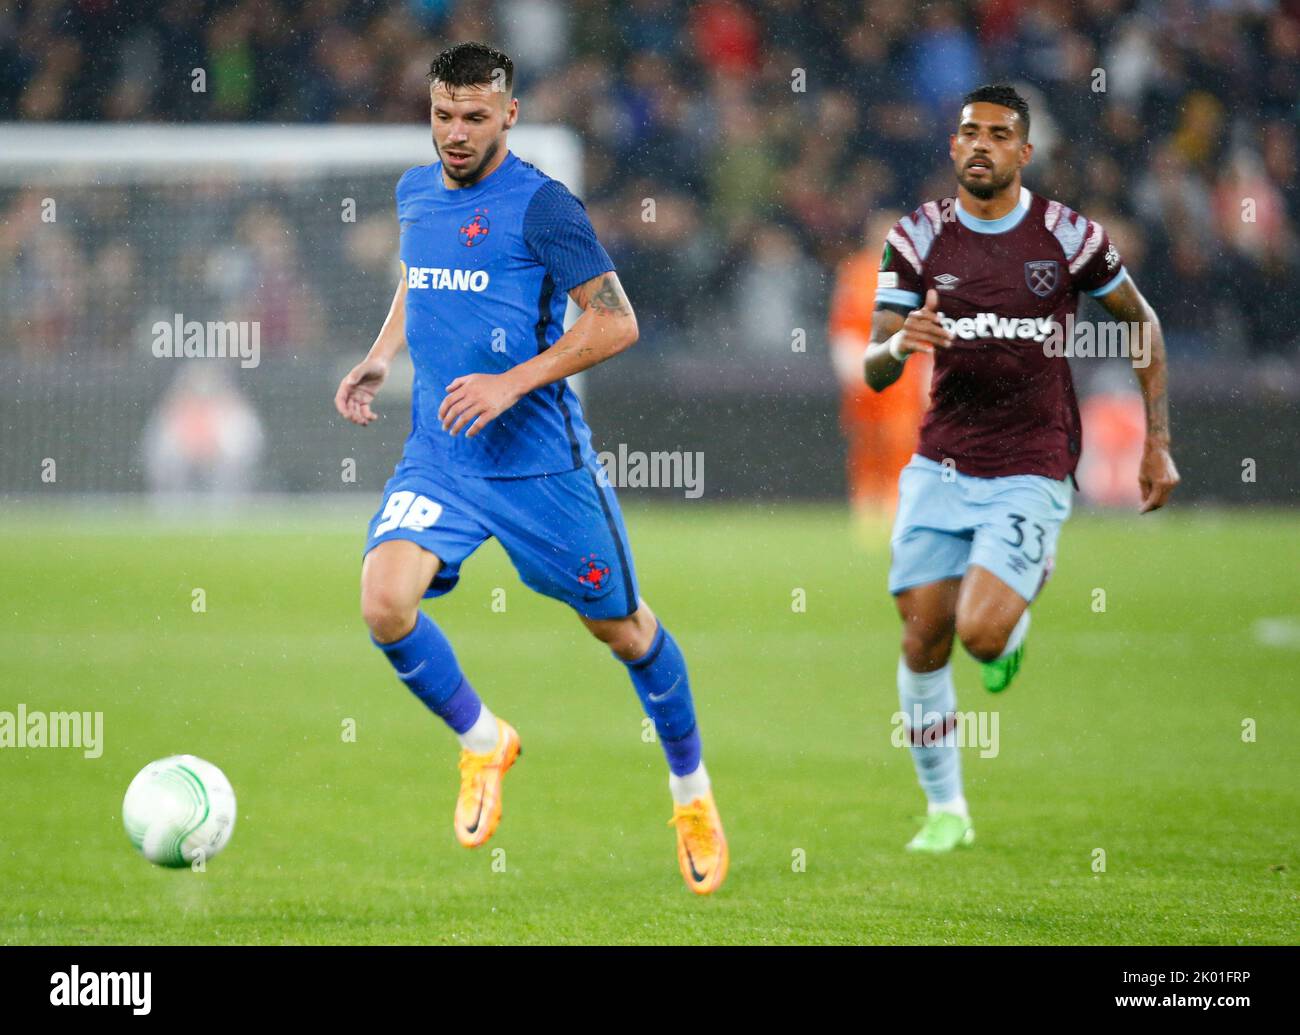 Andrei Cordea in action during Romania Superliga: A.F.C. HERMANNSTADT  News Photo - Getty Images